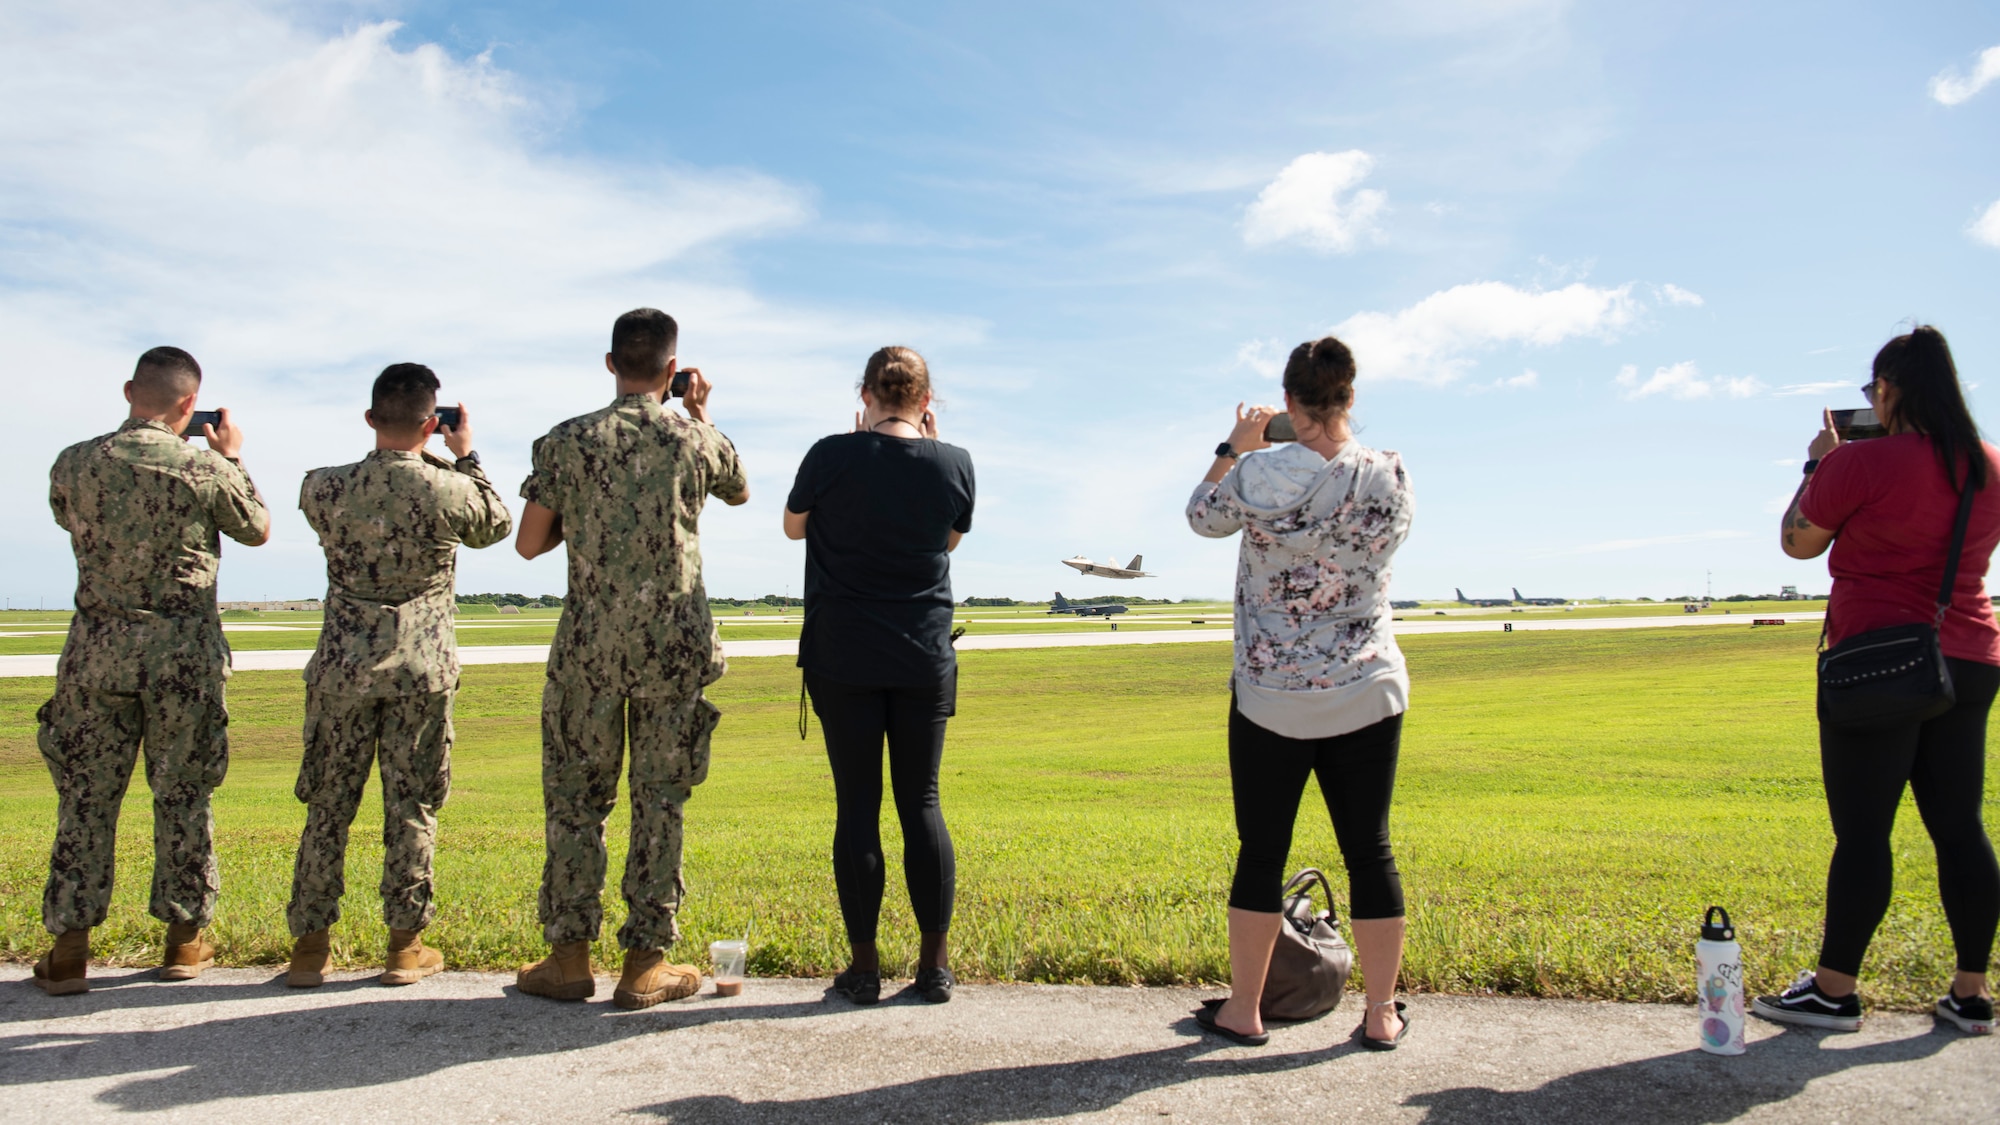 U.S. Navy Sailors and civilian members watch as a U.S. Air Force F-22 Raptor assigned to Joint Base Elmendorf-Richardson, Alaska, takes off during a flight line engagement for Pacific Iron 2021 at Andersen Air Force Base, Guam, Aug. 4, 2021. The flight line viewing was an opportunity to see aircraft takeoff up-close and to discuss general aircraft roles, while showcasing the immense effort that it takes to generate airpower. (U.S. Air Force photo by Senior Airman Aubree Owens)